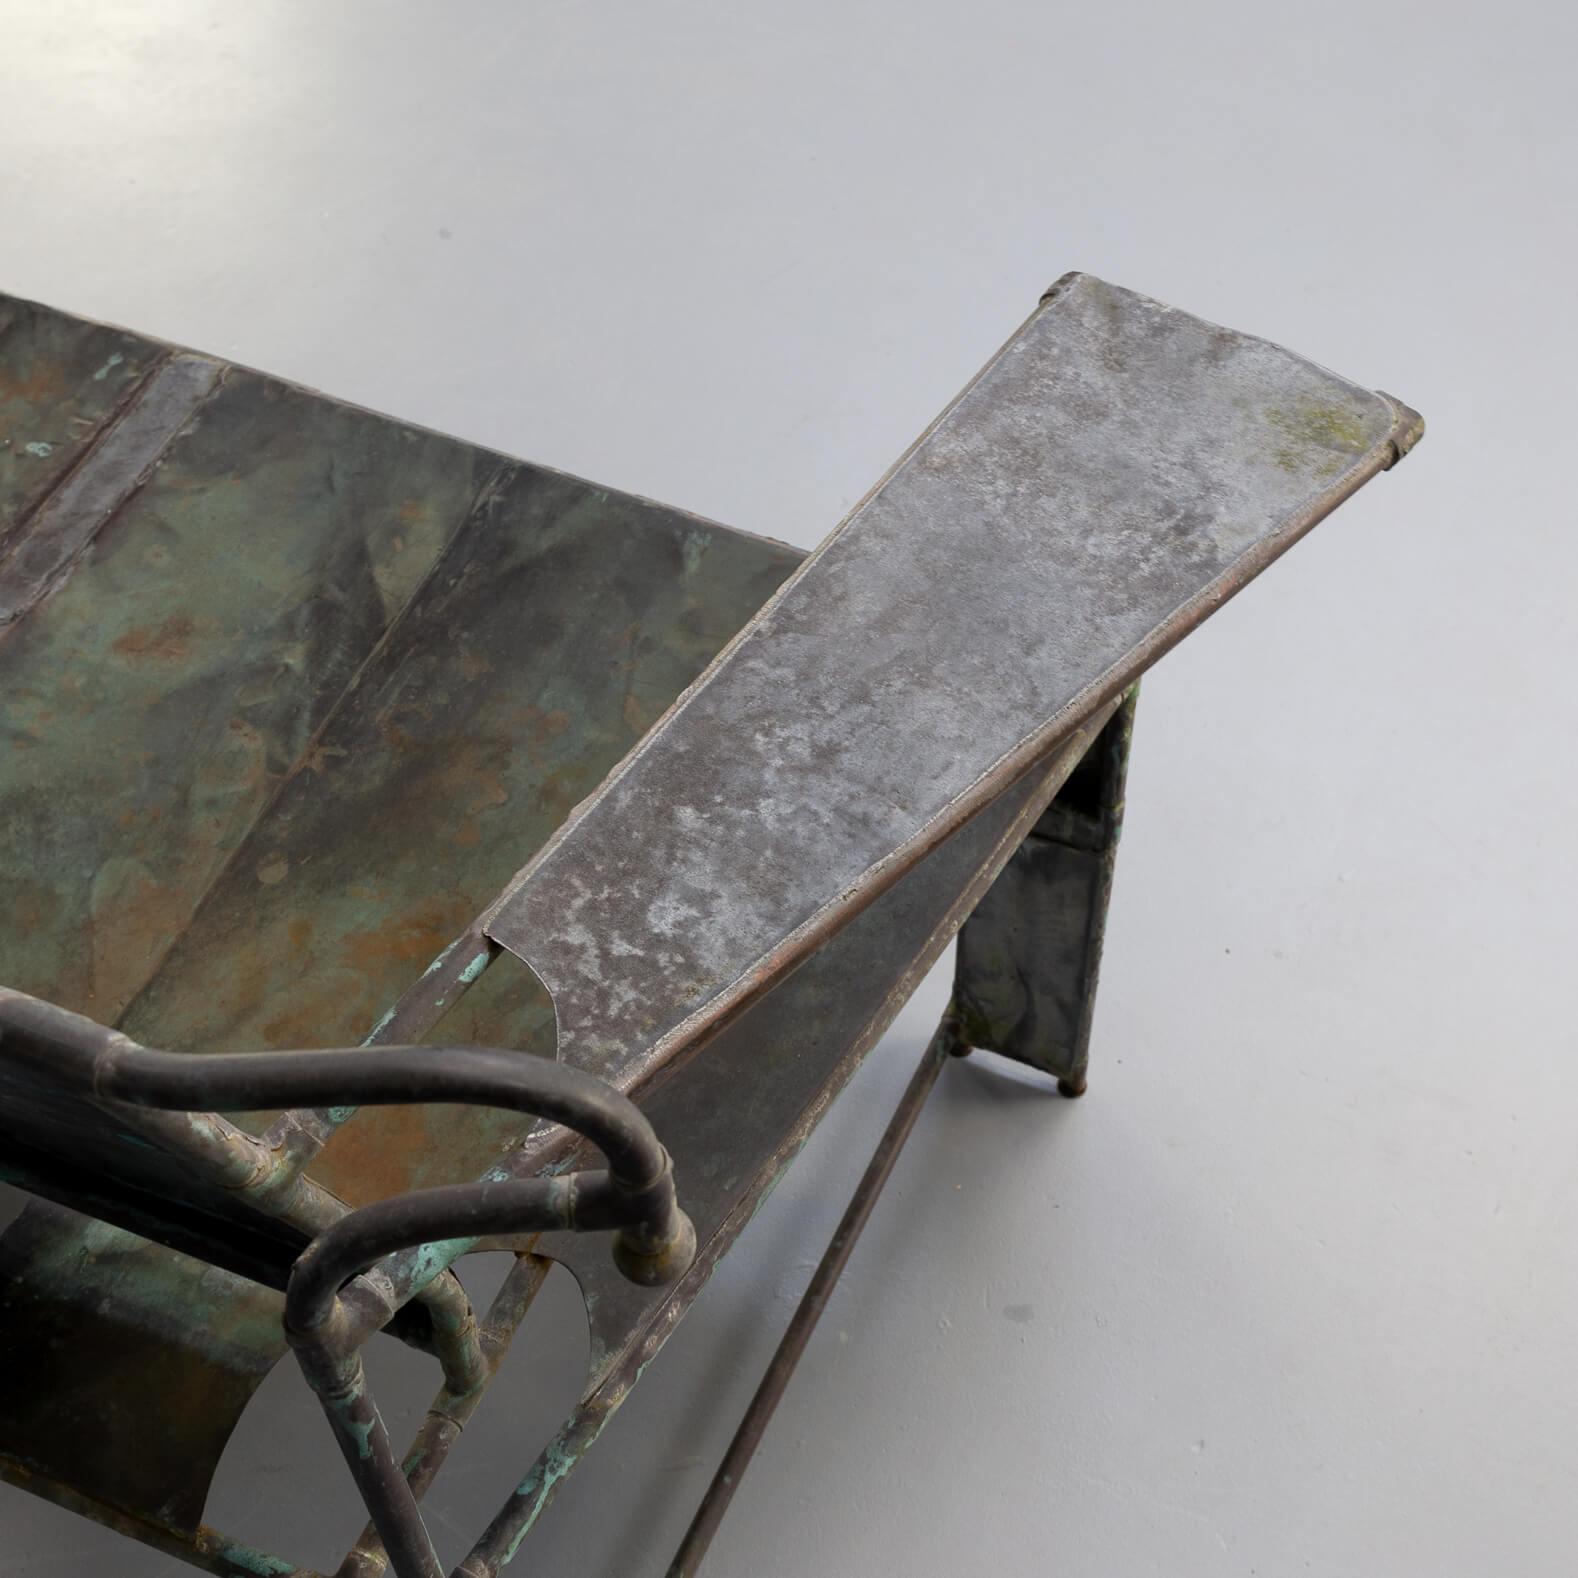 90s copper and zinc artwork handmade bench by Cor de Ree For Sale 5